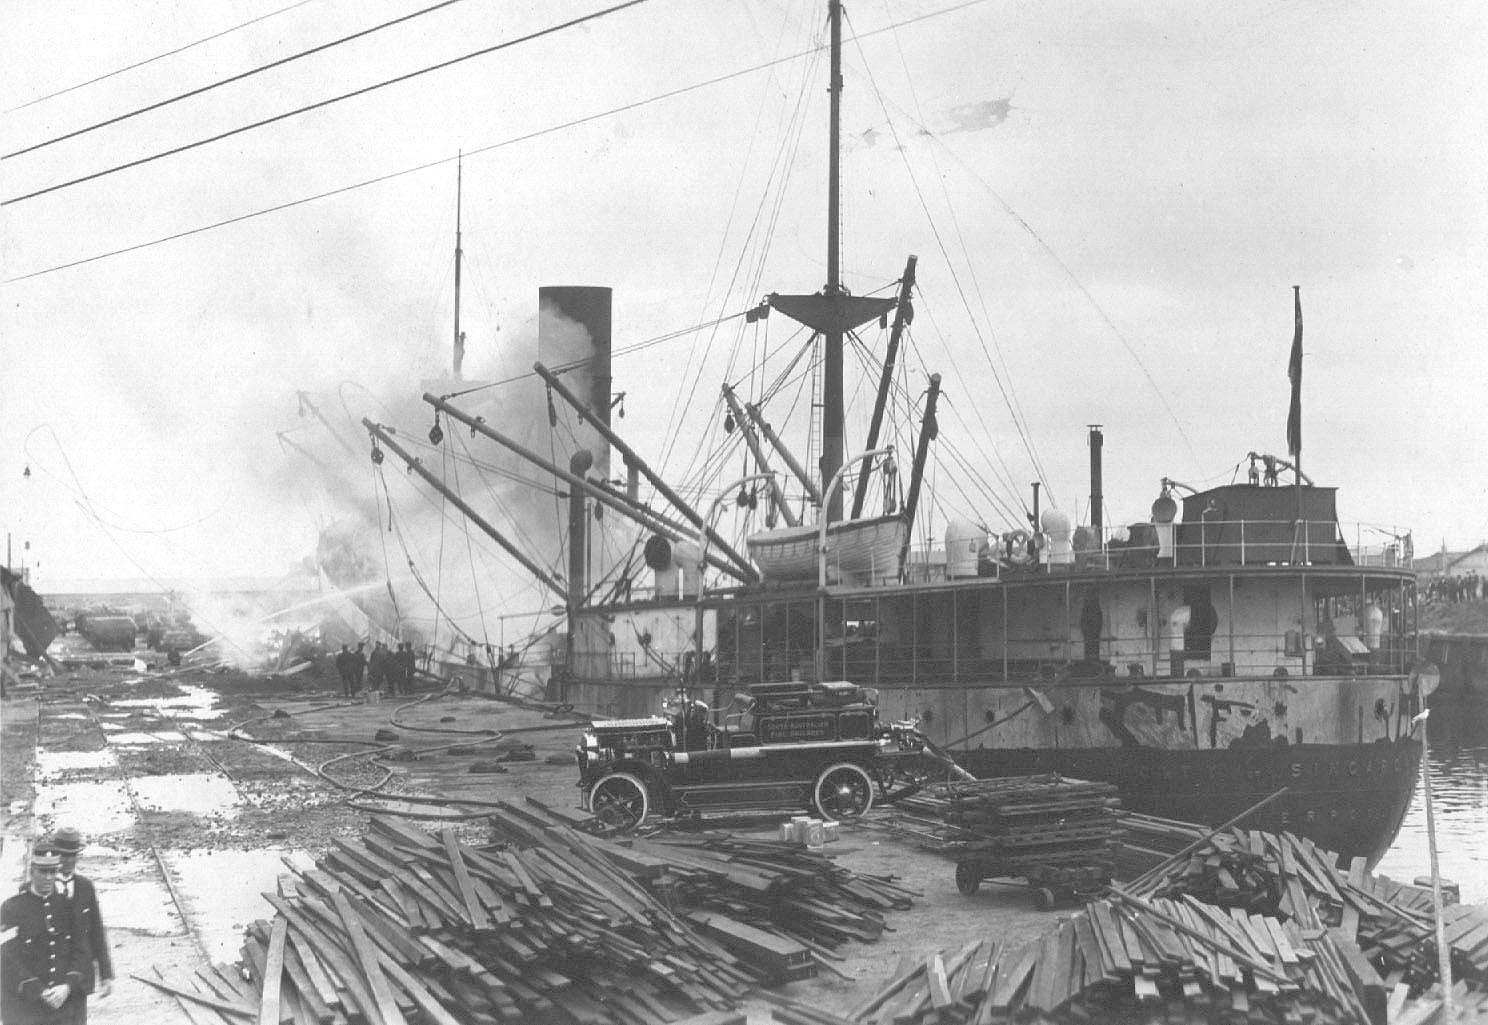 General cargo vessel "City Of Singapore", built in 1923 at west Hartelpool by Wm Gray & Co for Ellerman Lines Ltd.  On 26 - 4 - 1924 at 10pm the tragic scene at No 2 Quay, Port Adelaide, where the petrol laden "City Of singapore" exploded.  Explosives abo